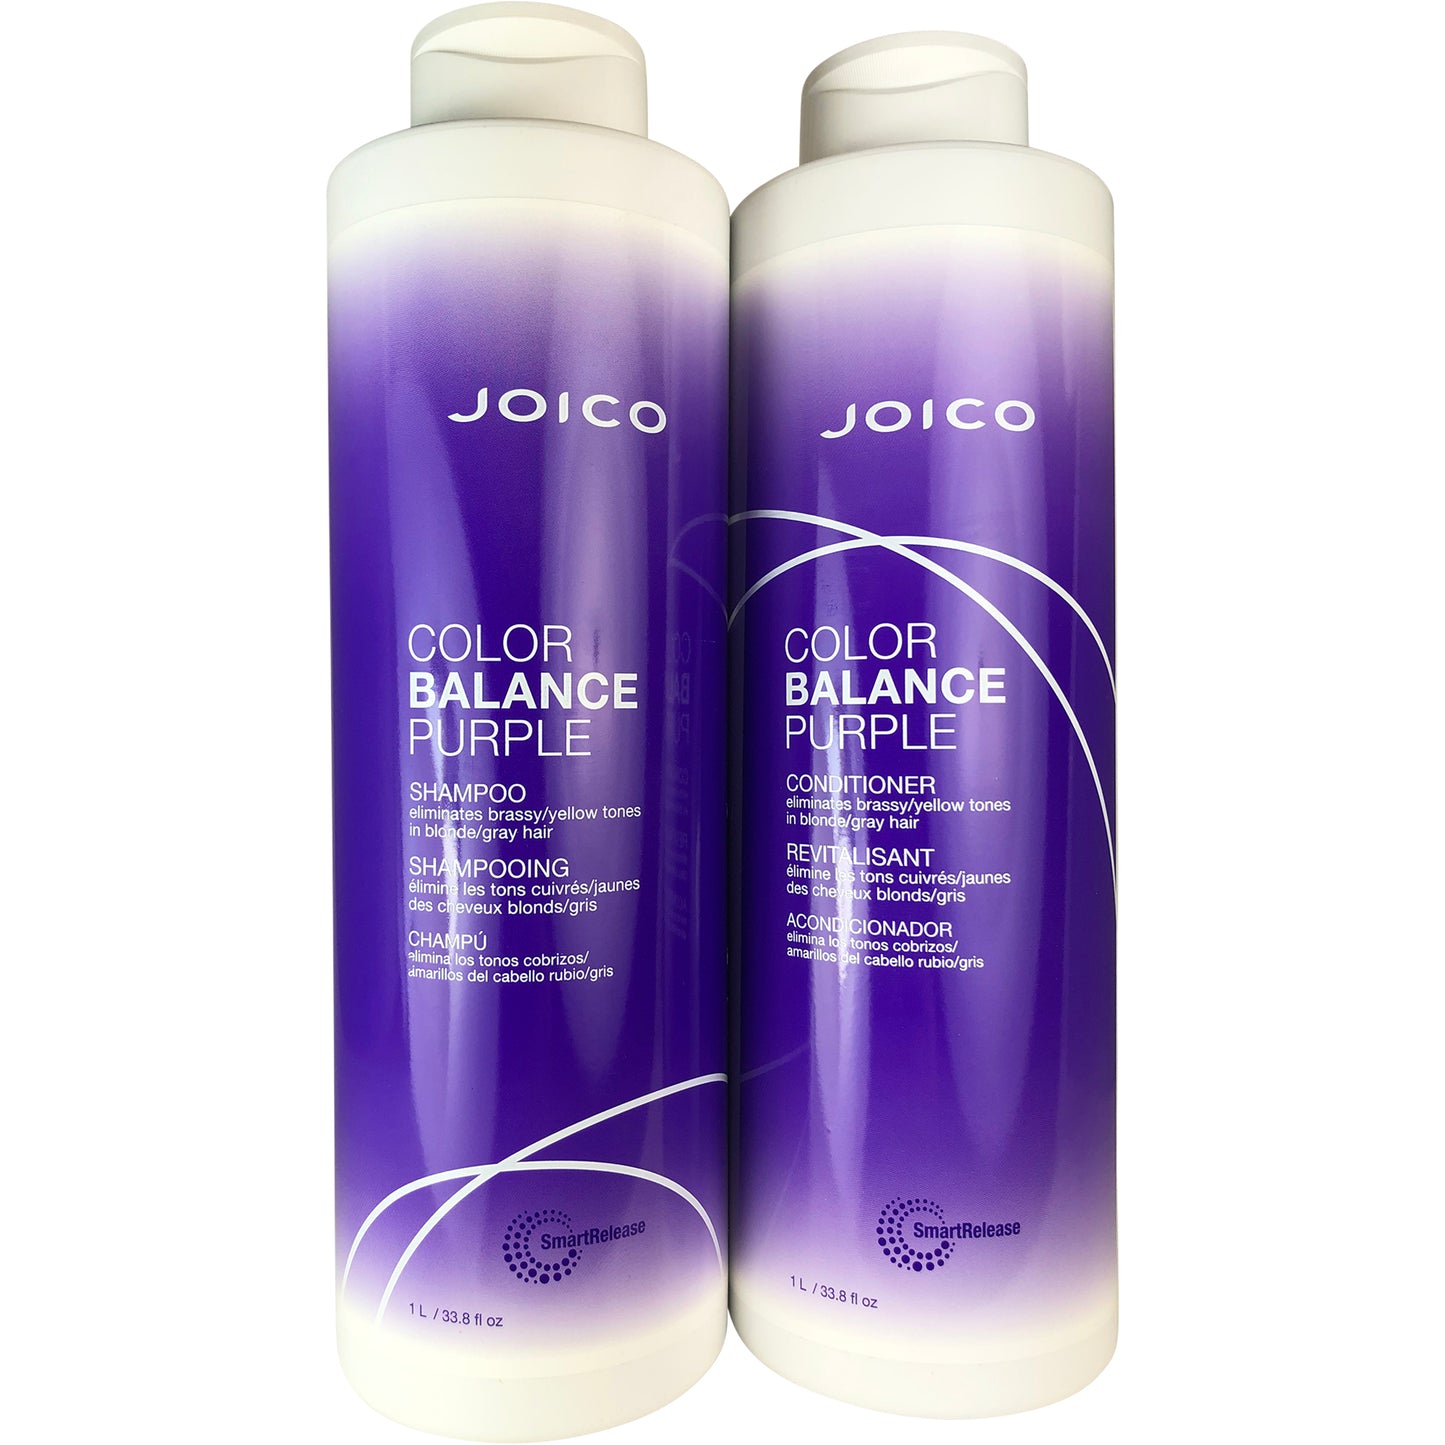 Joico Color Balance Purple Duo (Shampoo and Conditioner)